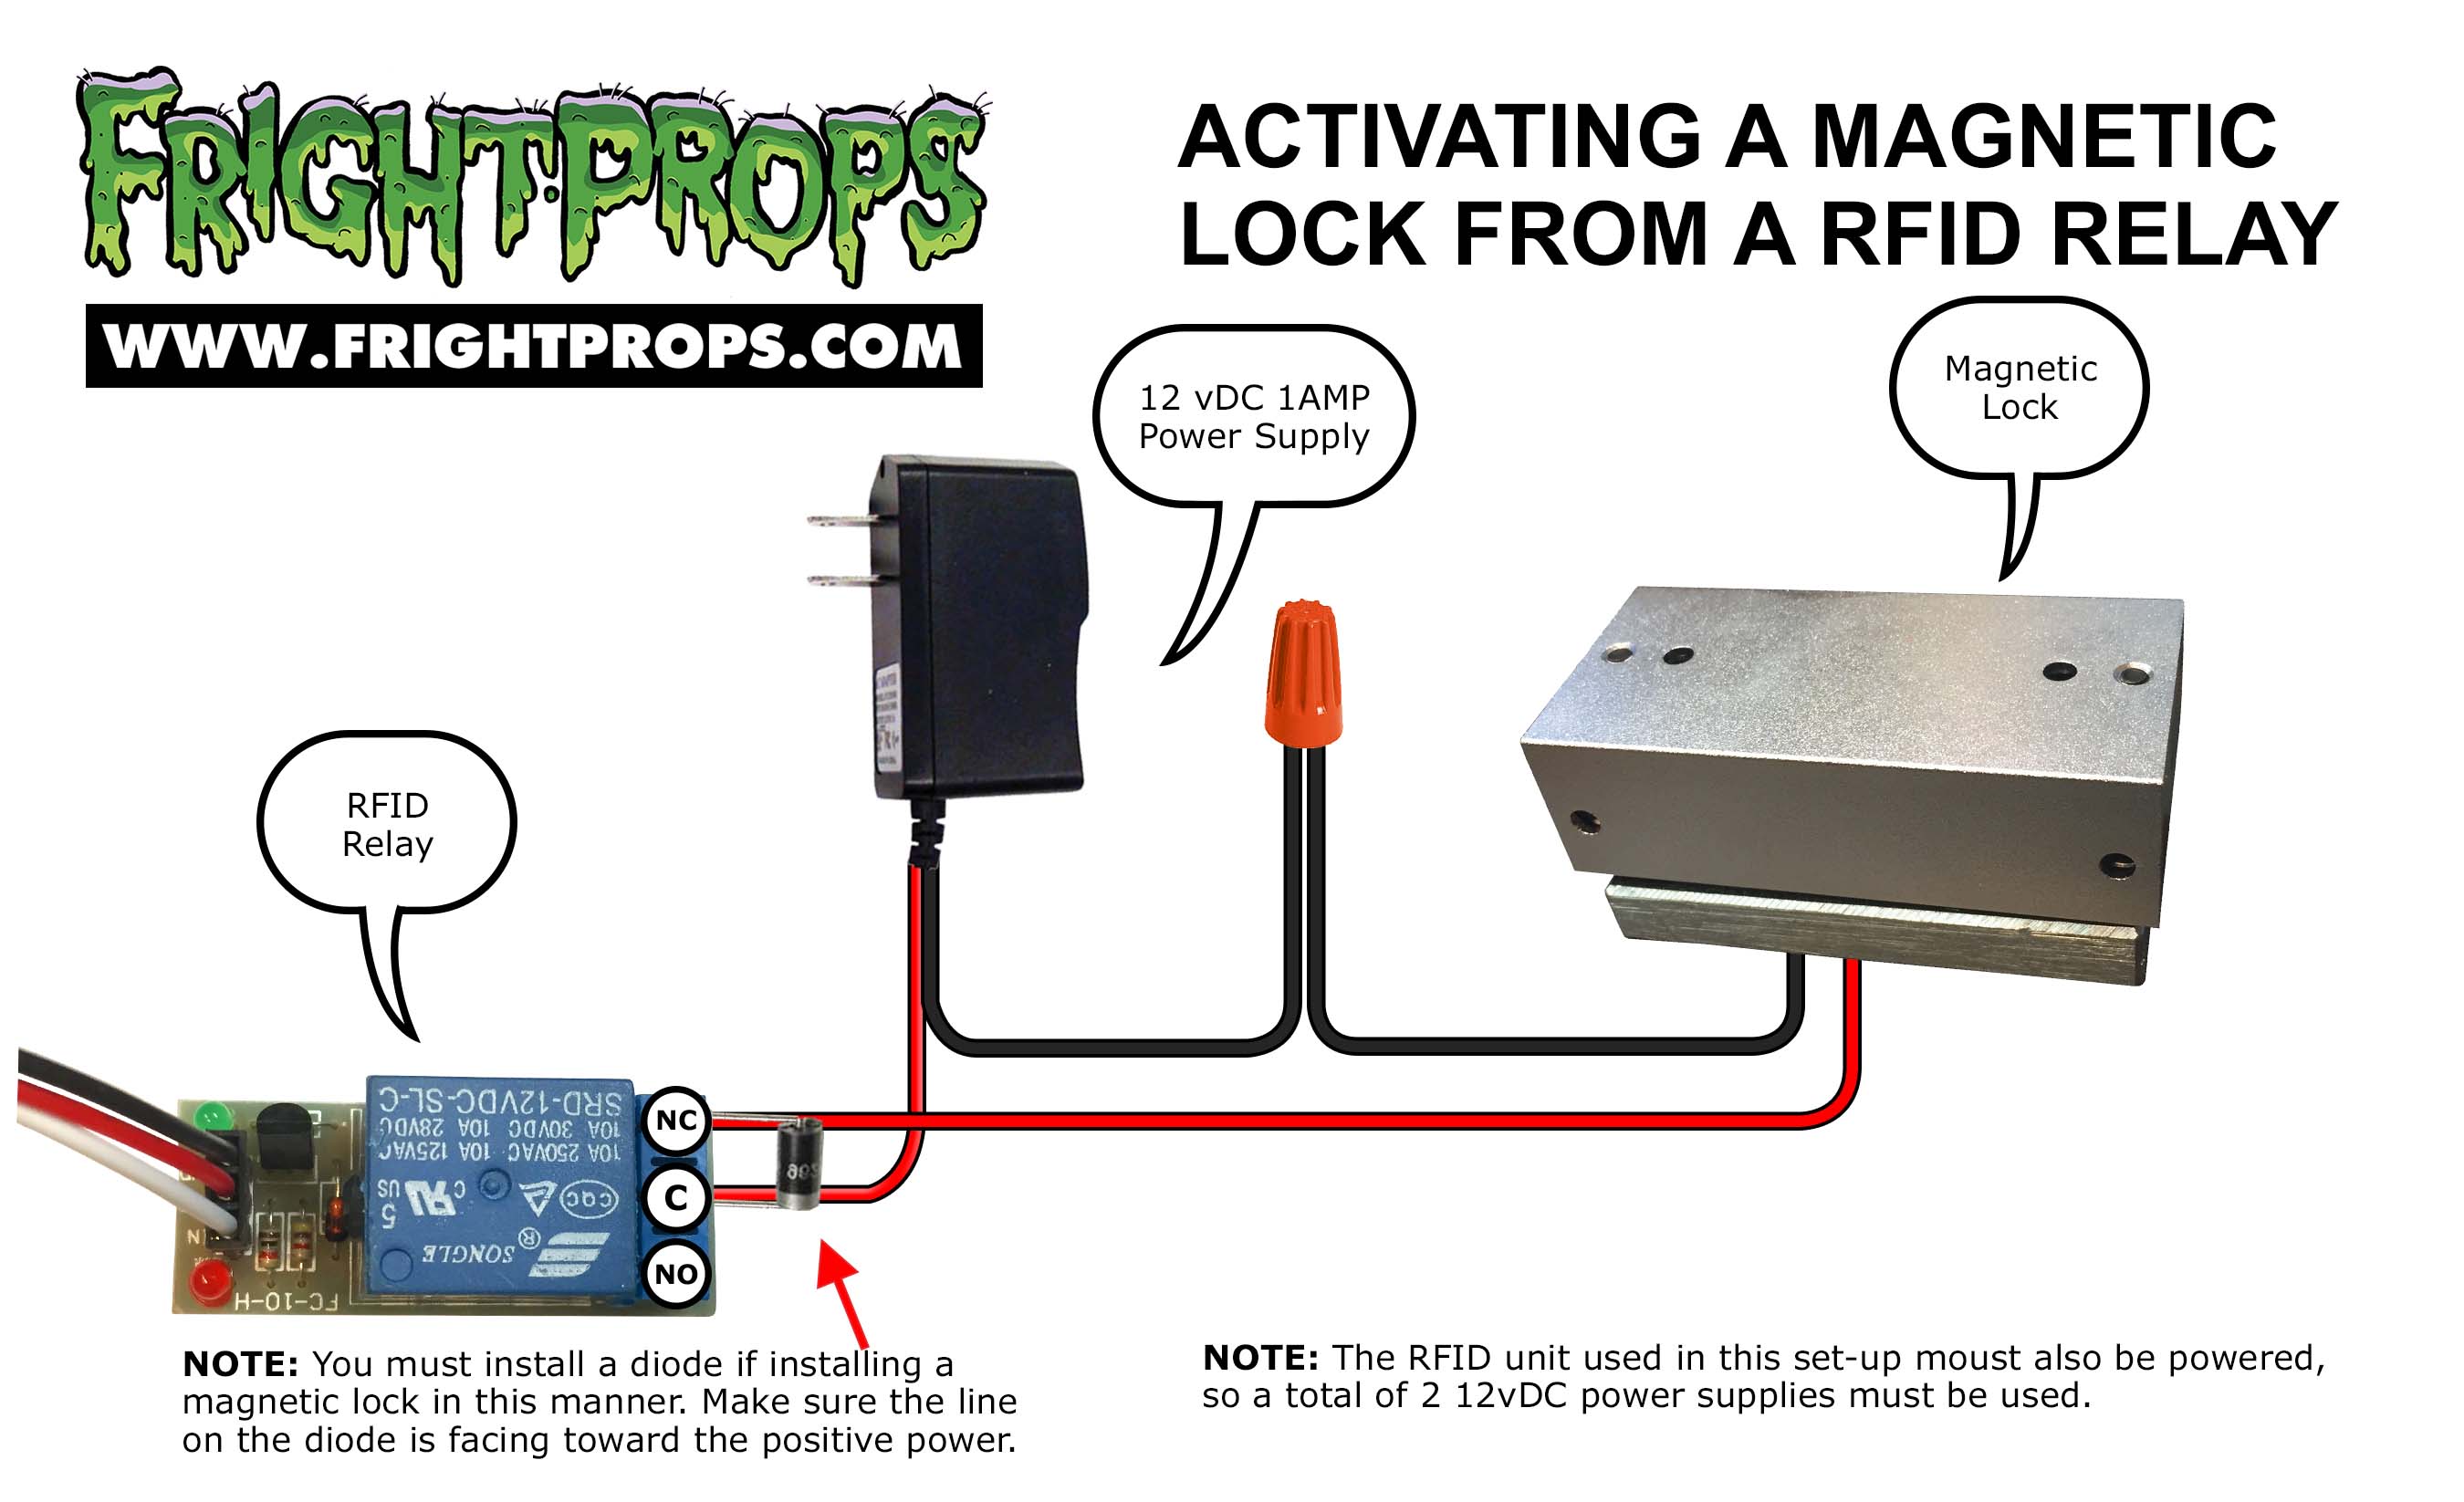 Activating a magnetic lock from a RFID relay